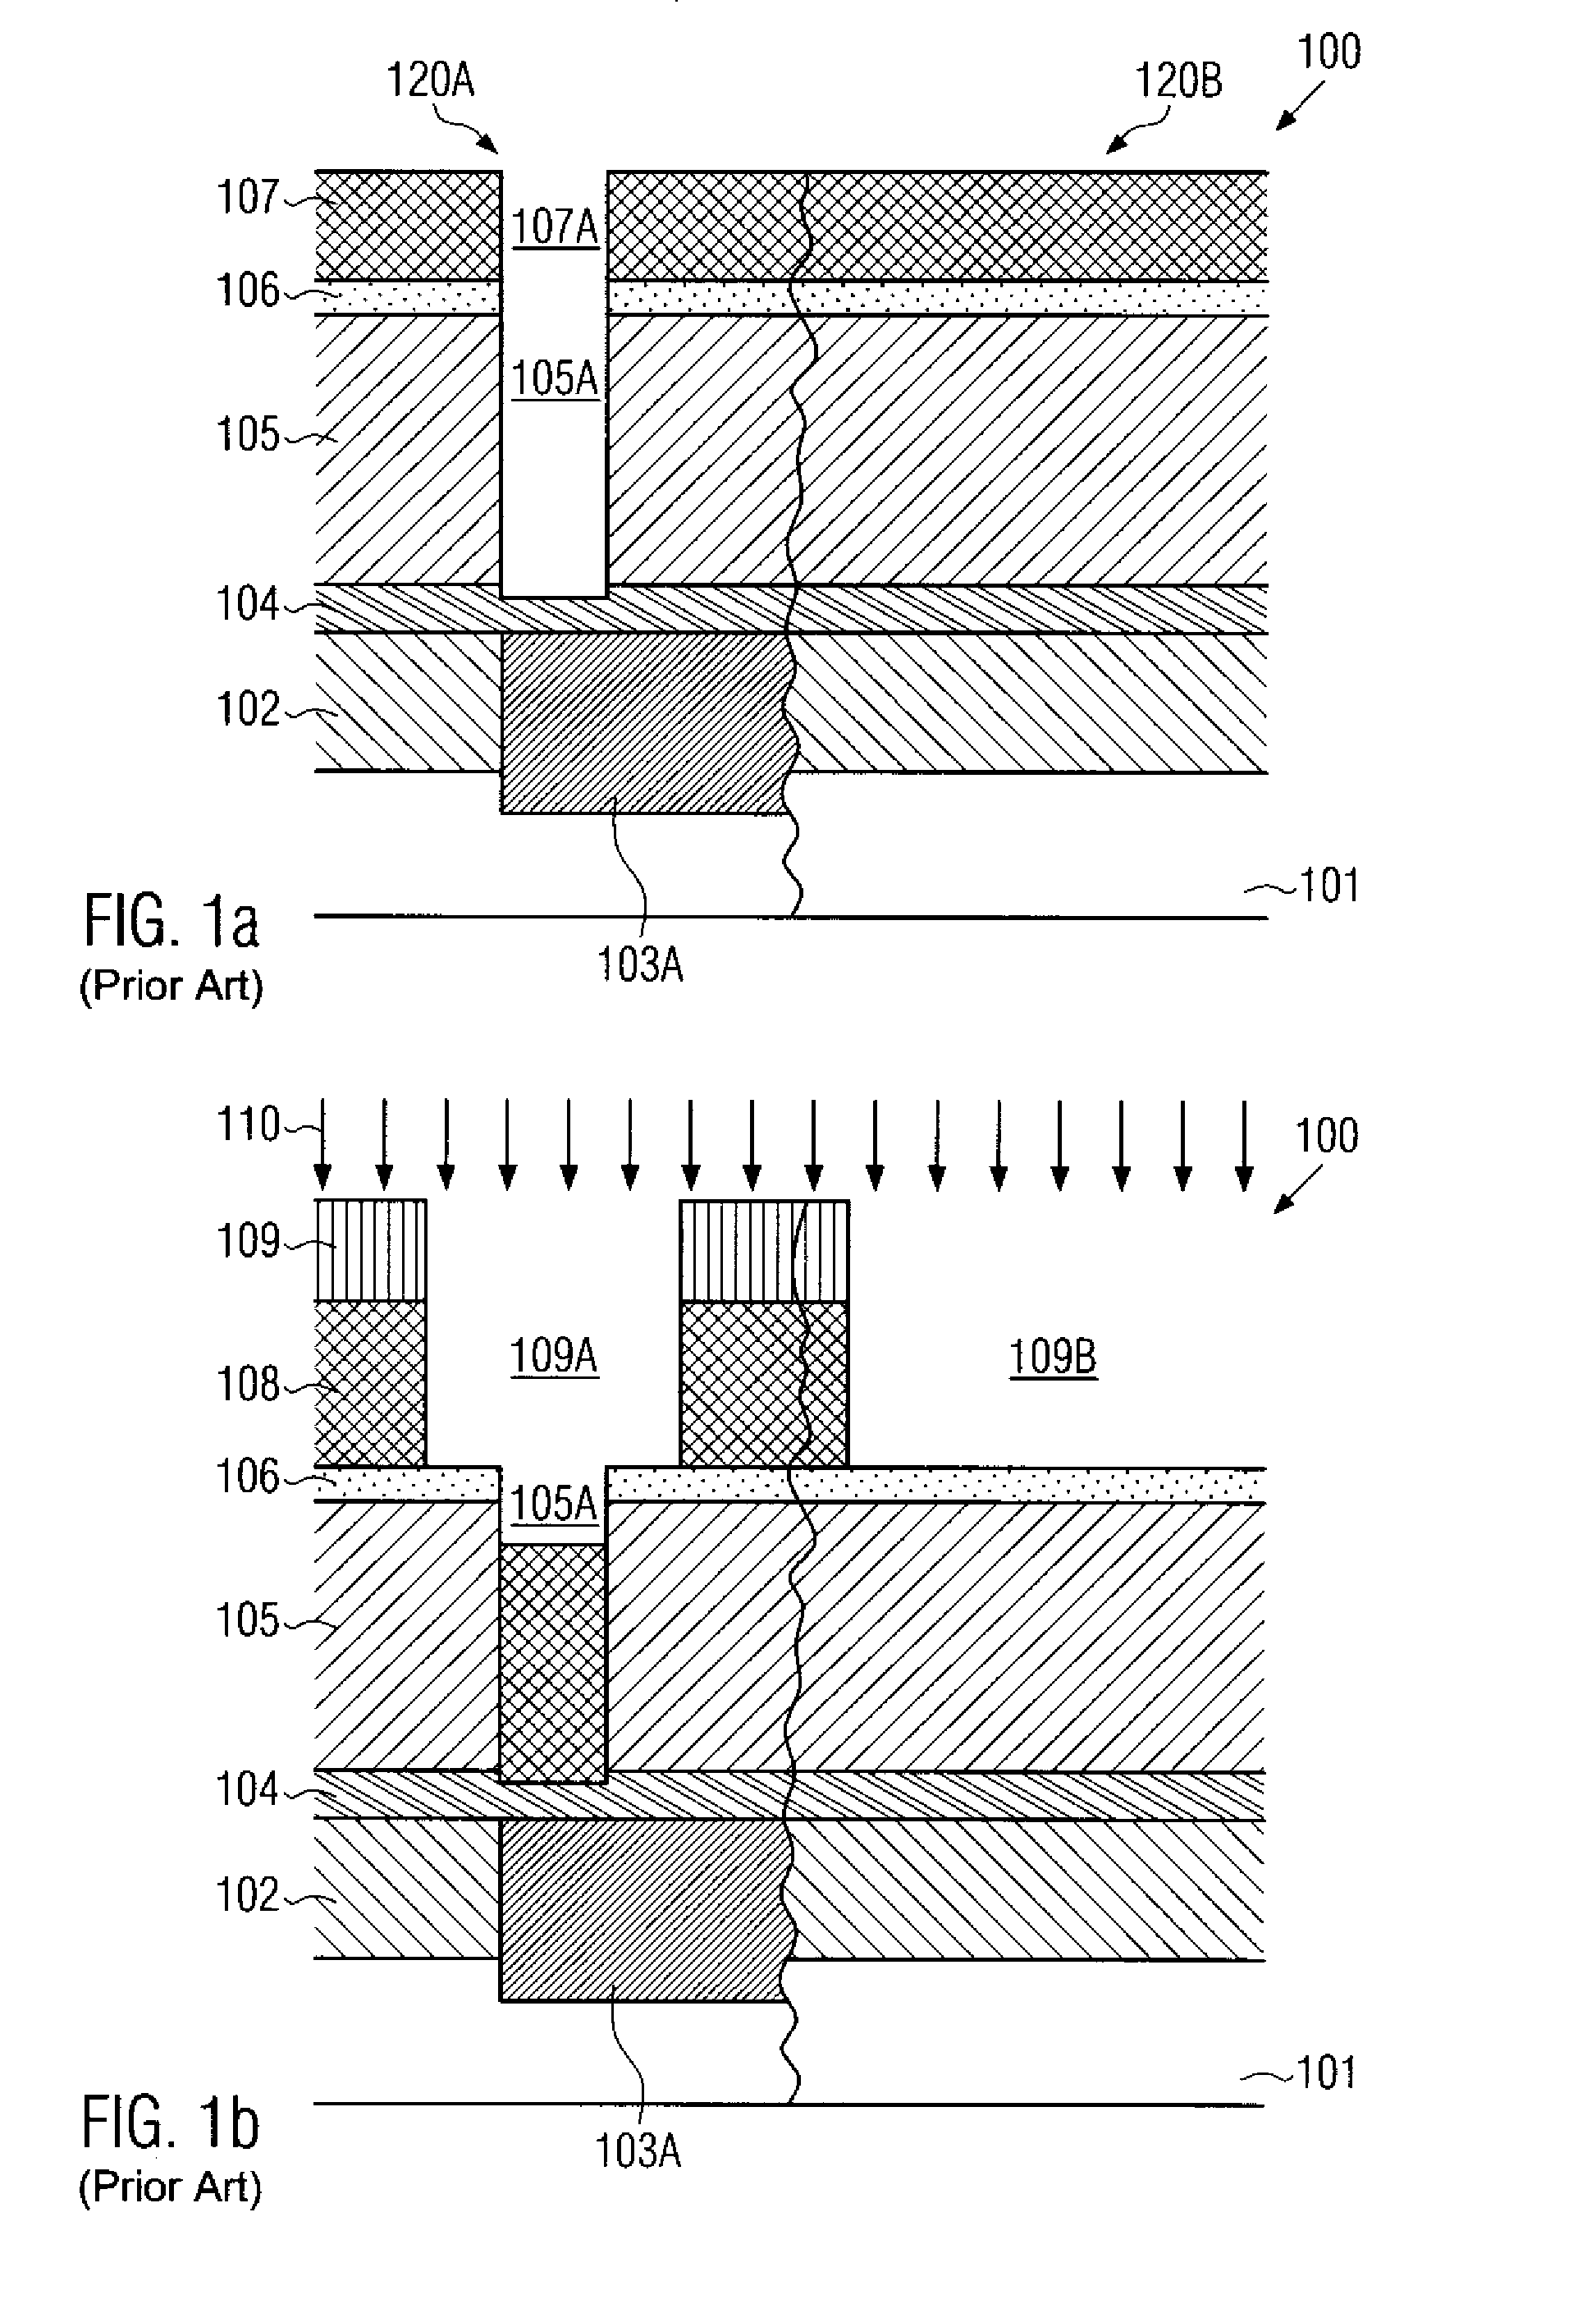 Technique for increasing adhesion of metallization layers by providing dummy vias